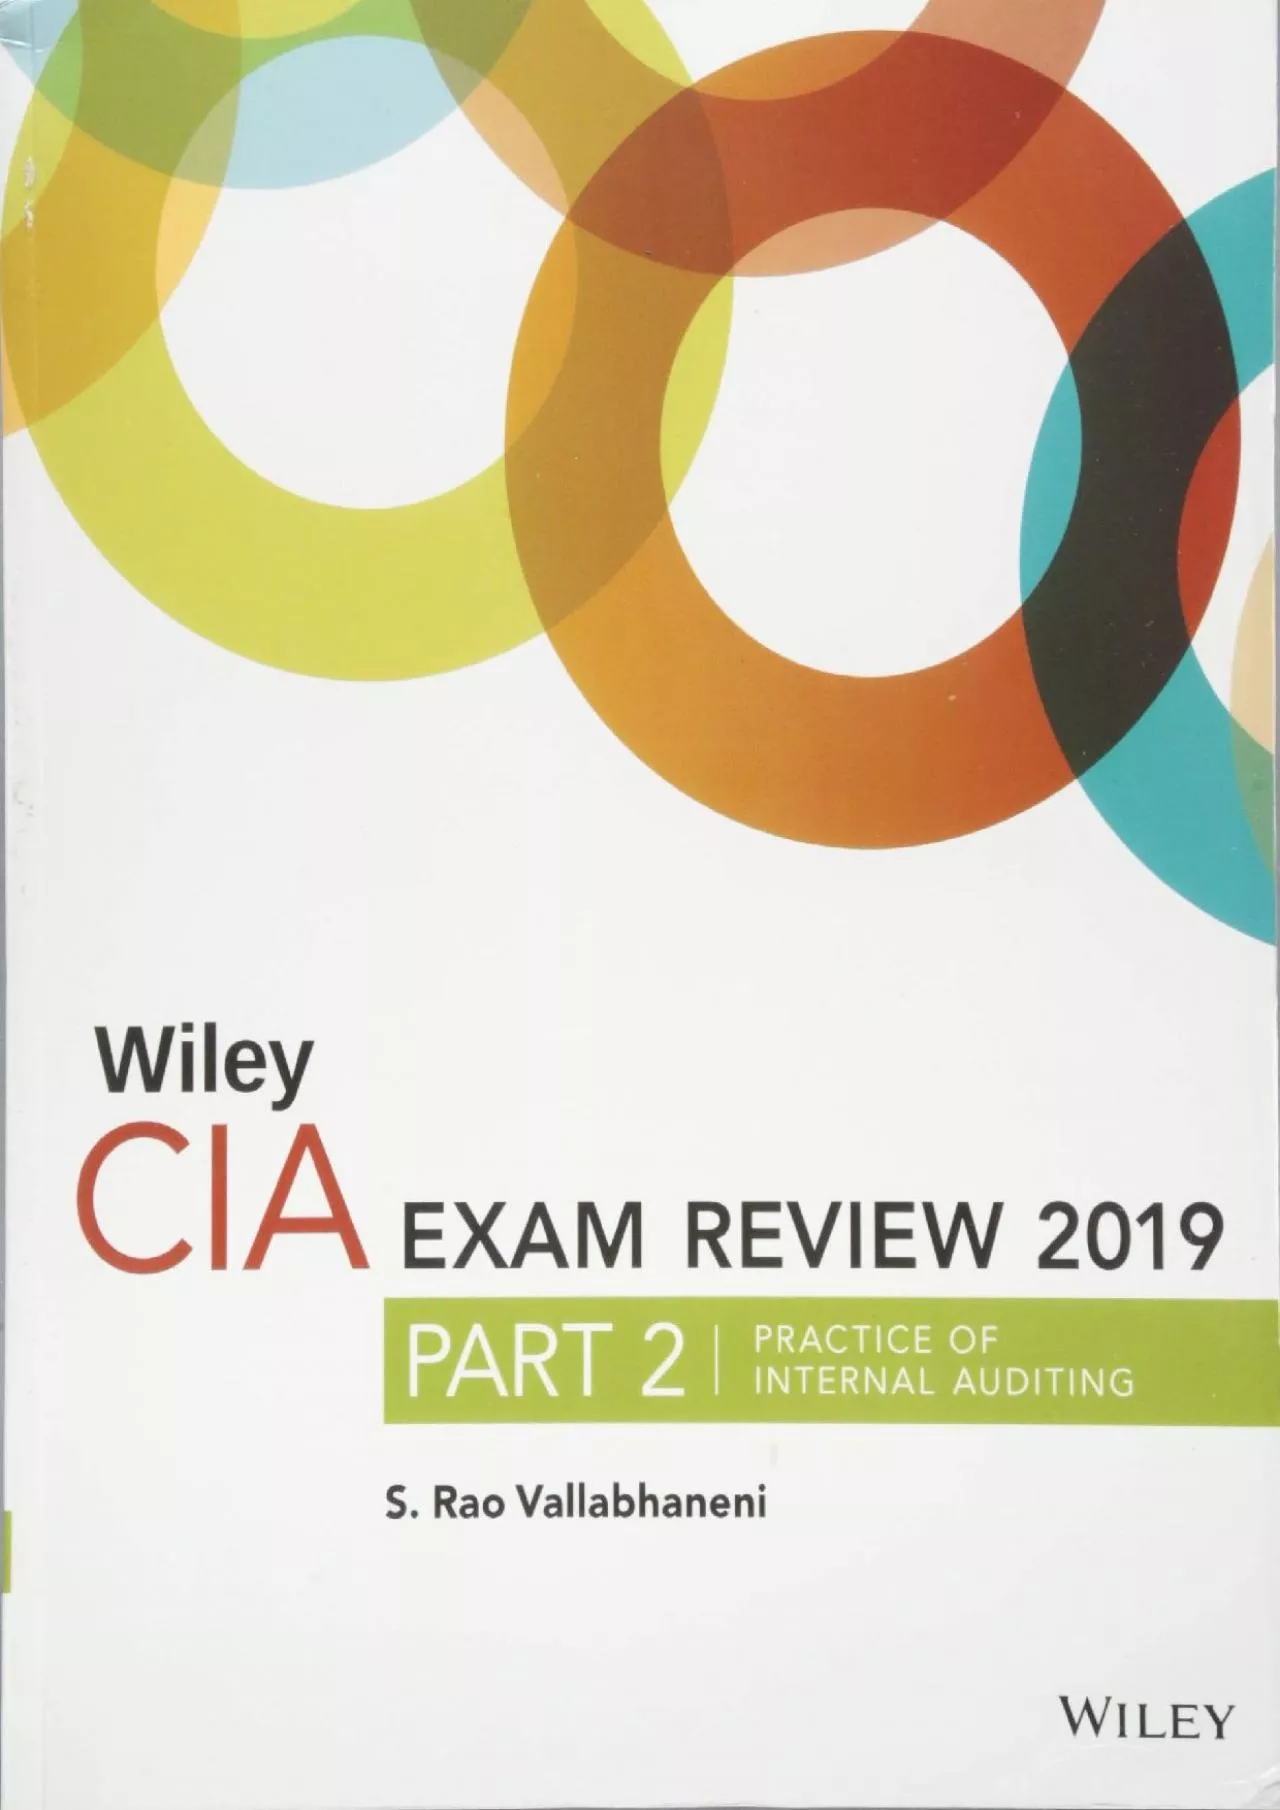 (DOWNLOAD)-Wiley CIA Exam Review 2019, Part 2: Practice of Internal Auditing (Wiley CIA